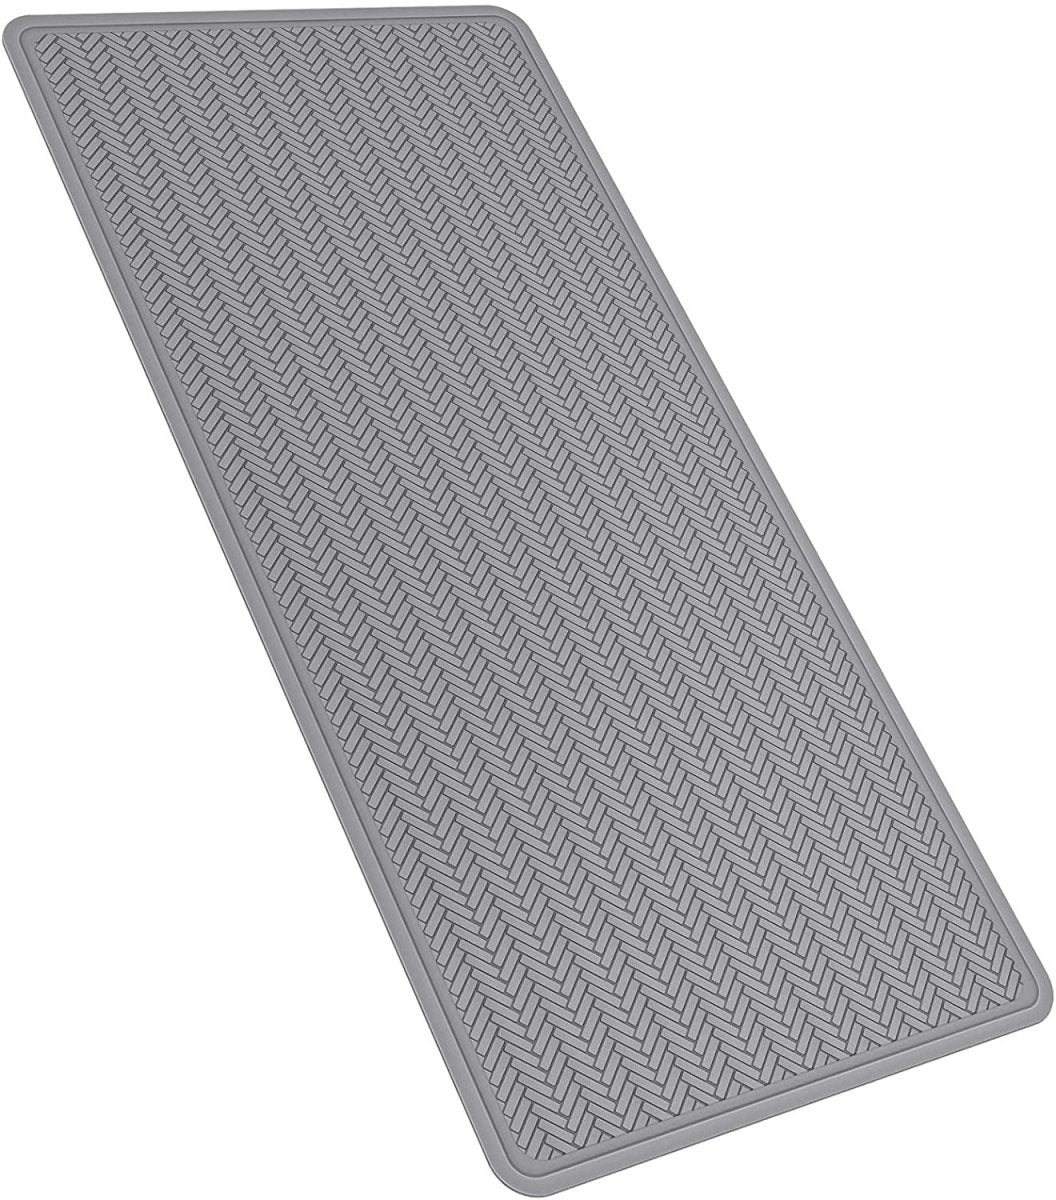 Extra Long 43X92 cm Rubber Non Slip Bathtub & Shower Mat - Soft Mat for Bathroom Tub with Strong Suction Cups